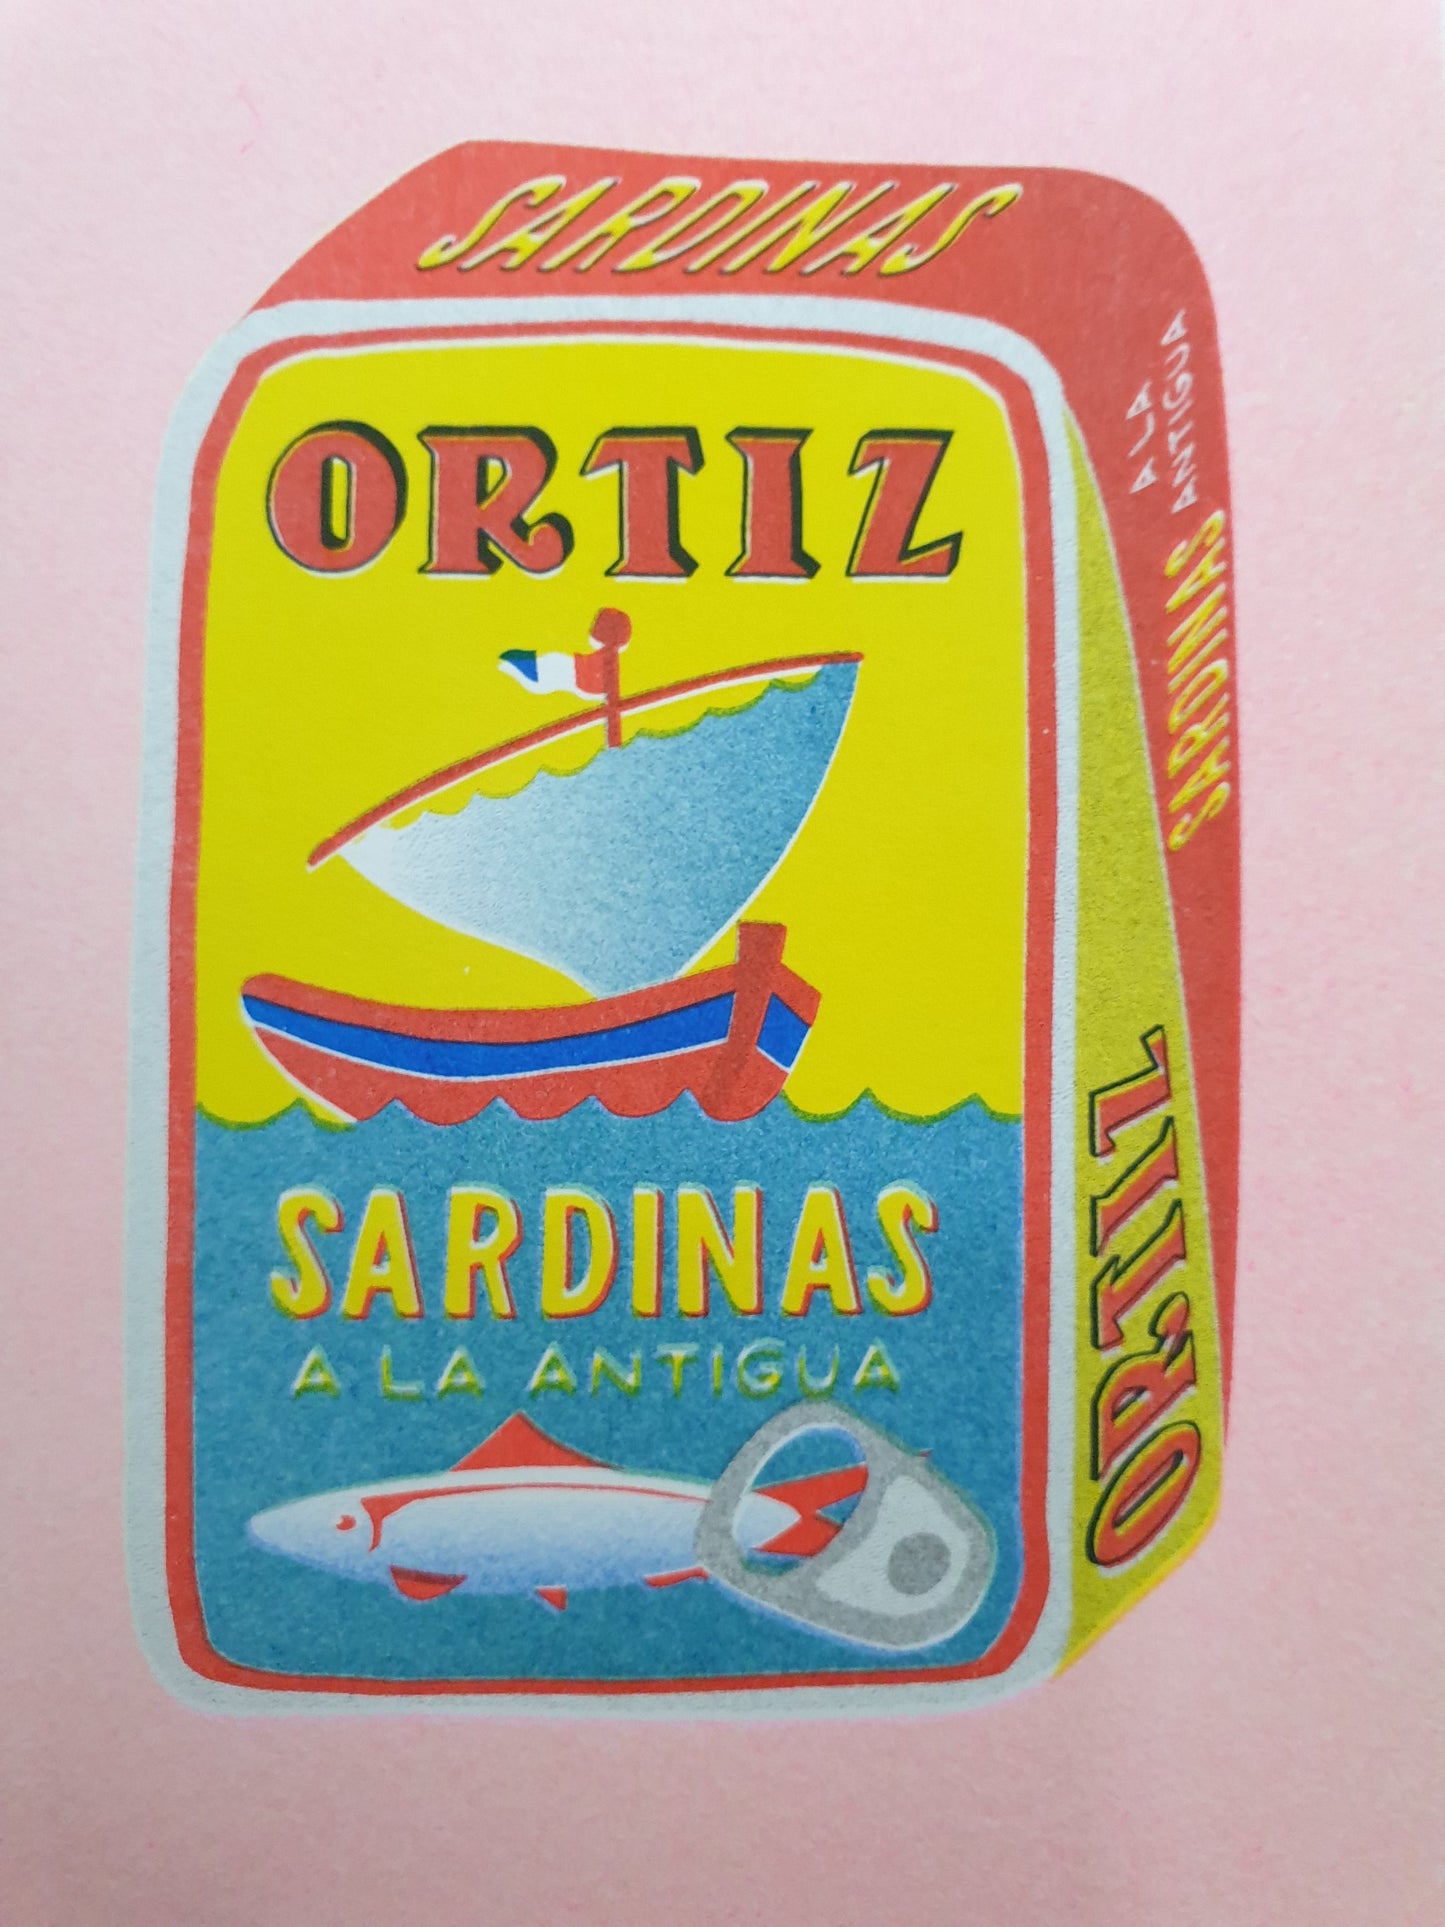 'A can full of sardines' - FRAMED risograph print by 'We are out of office'